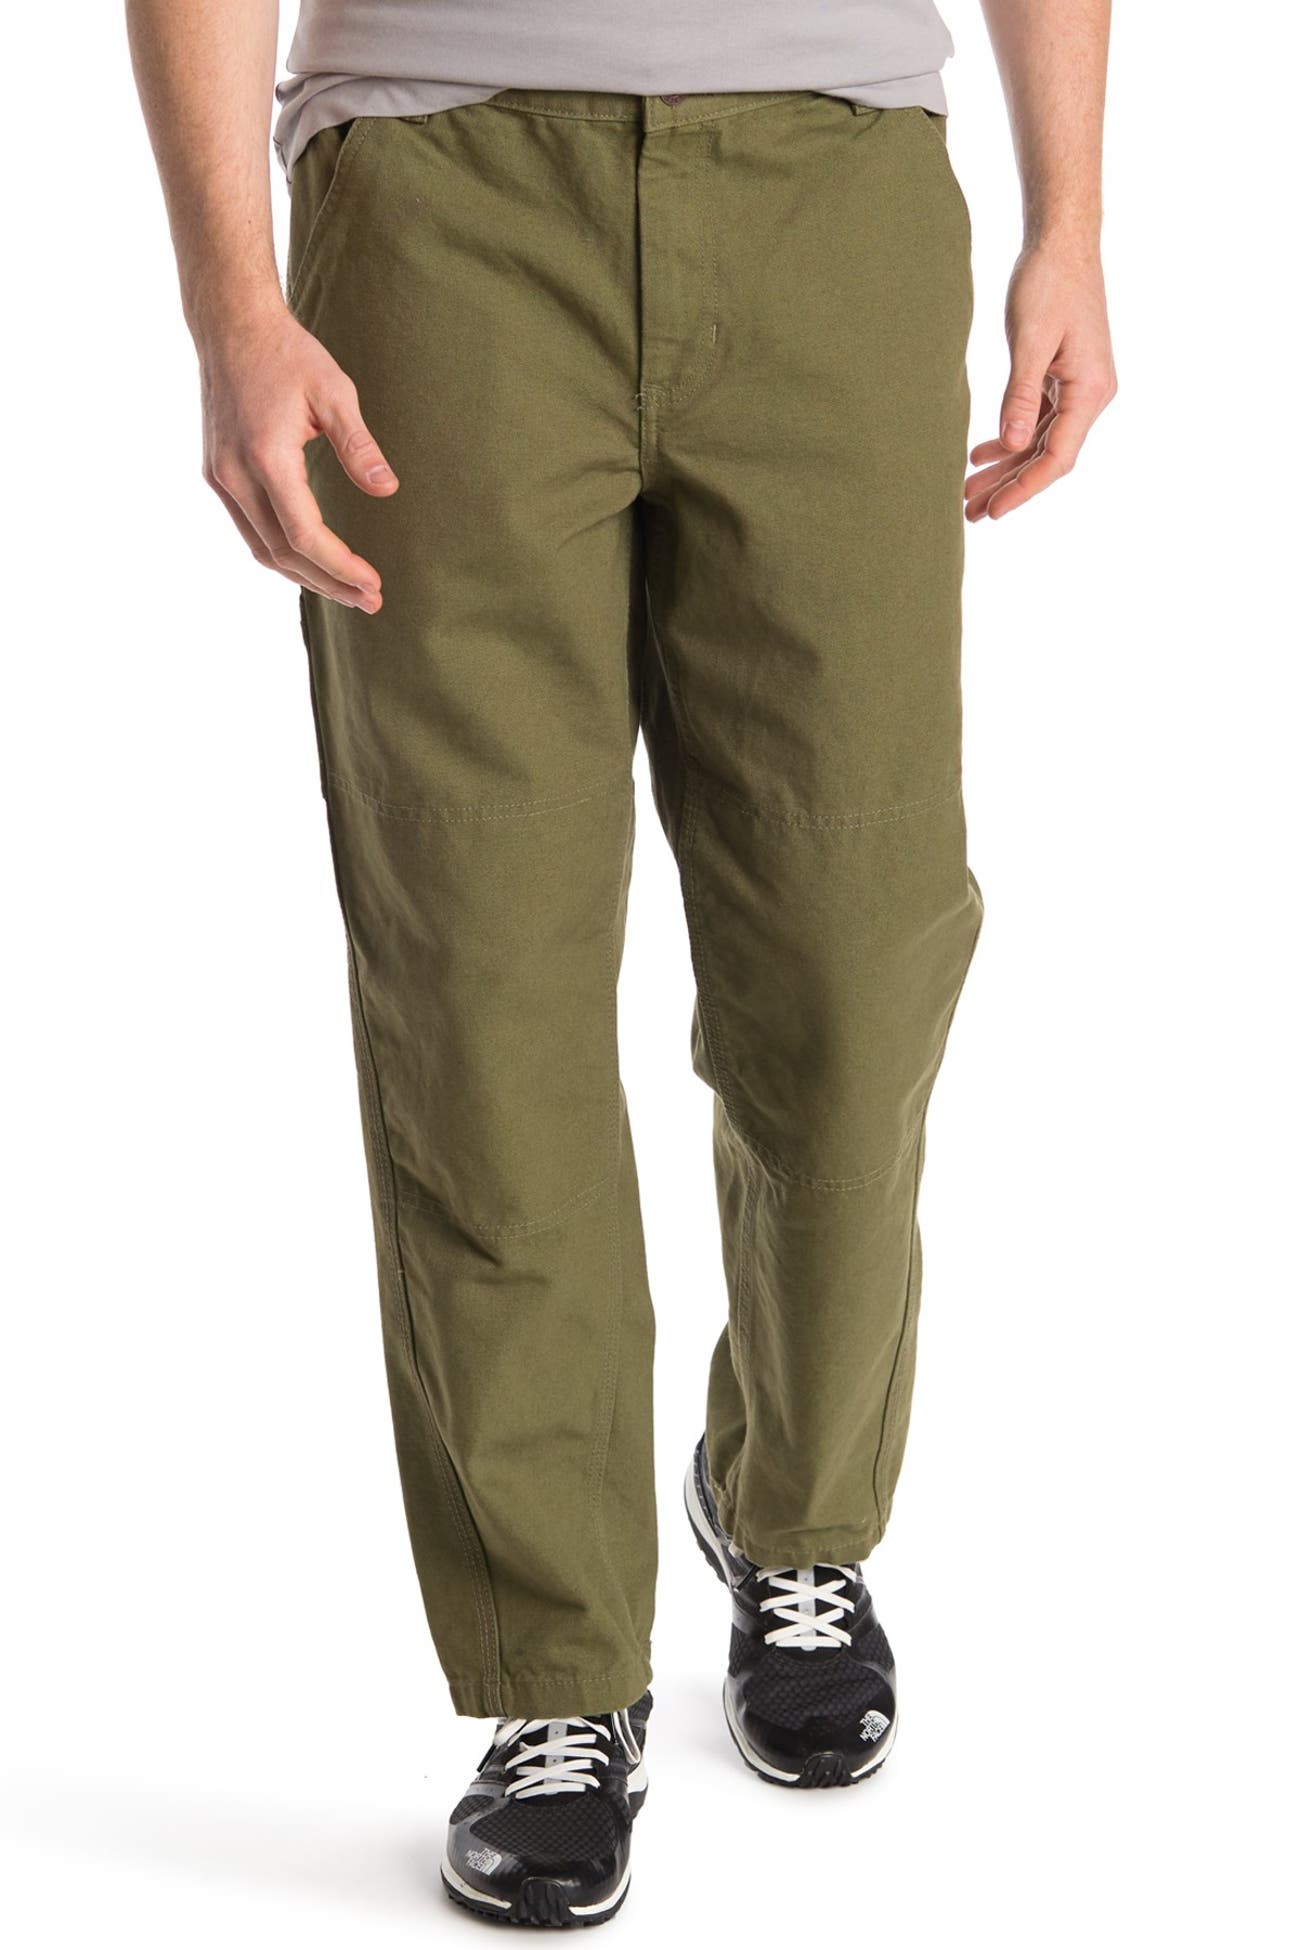 The North Face | Berkeley Canvas Pants | Nordstrom Rack